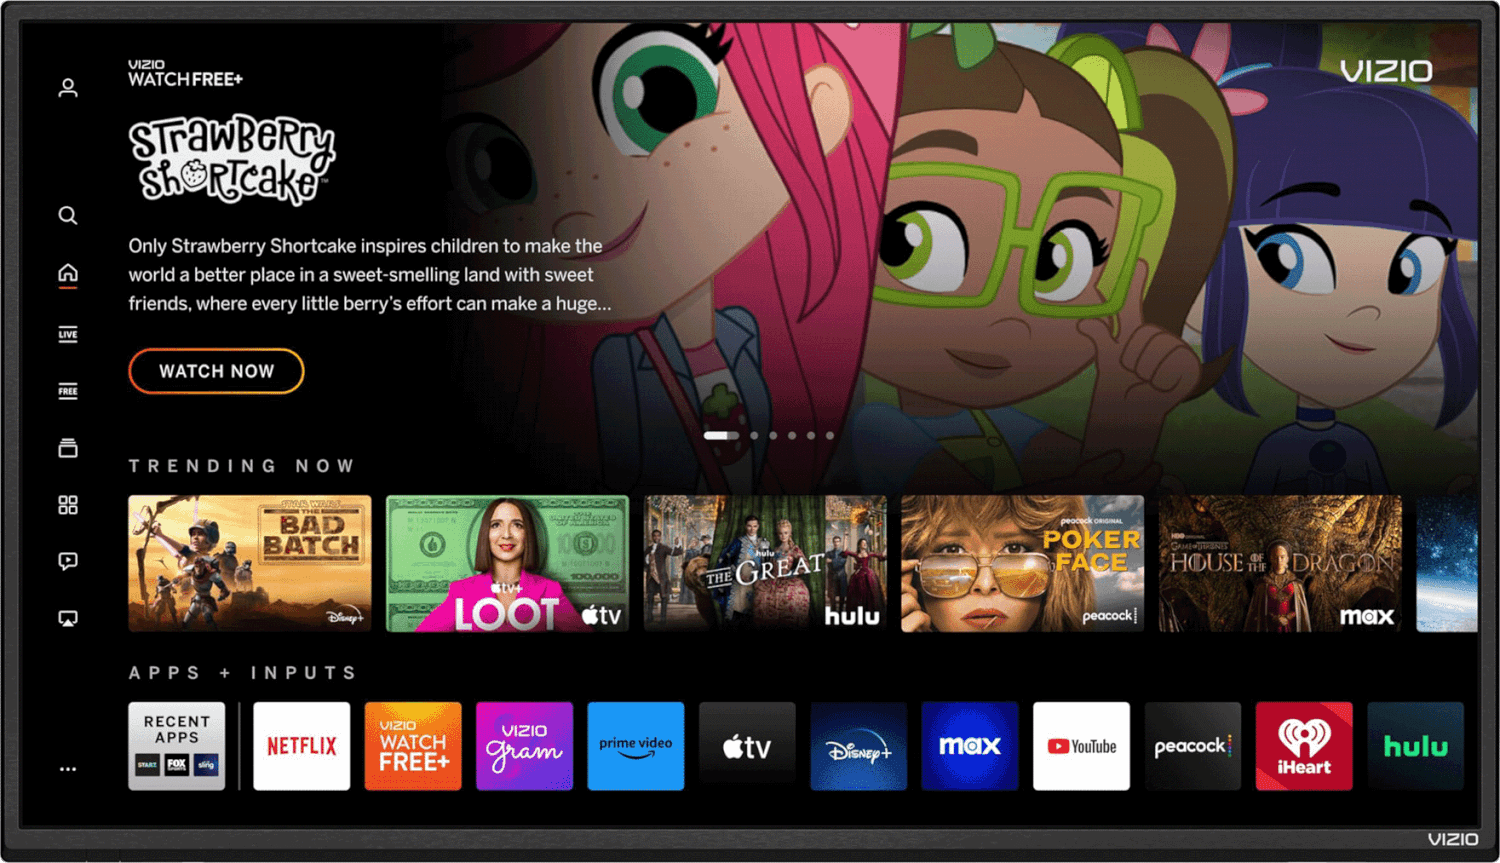 A Vizio D-Series Smart TV is an example of a Connected TV